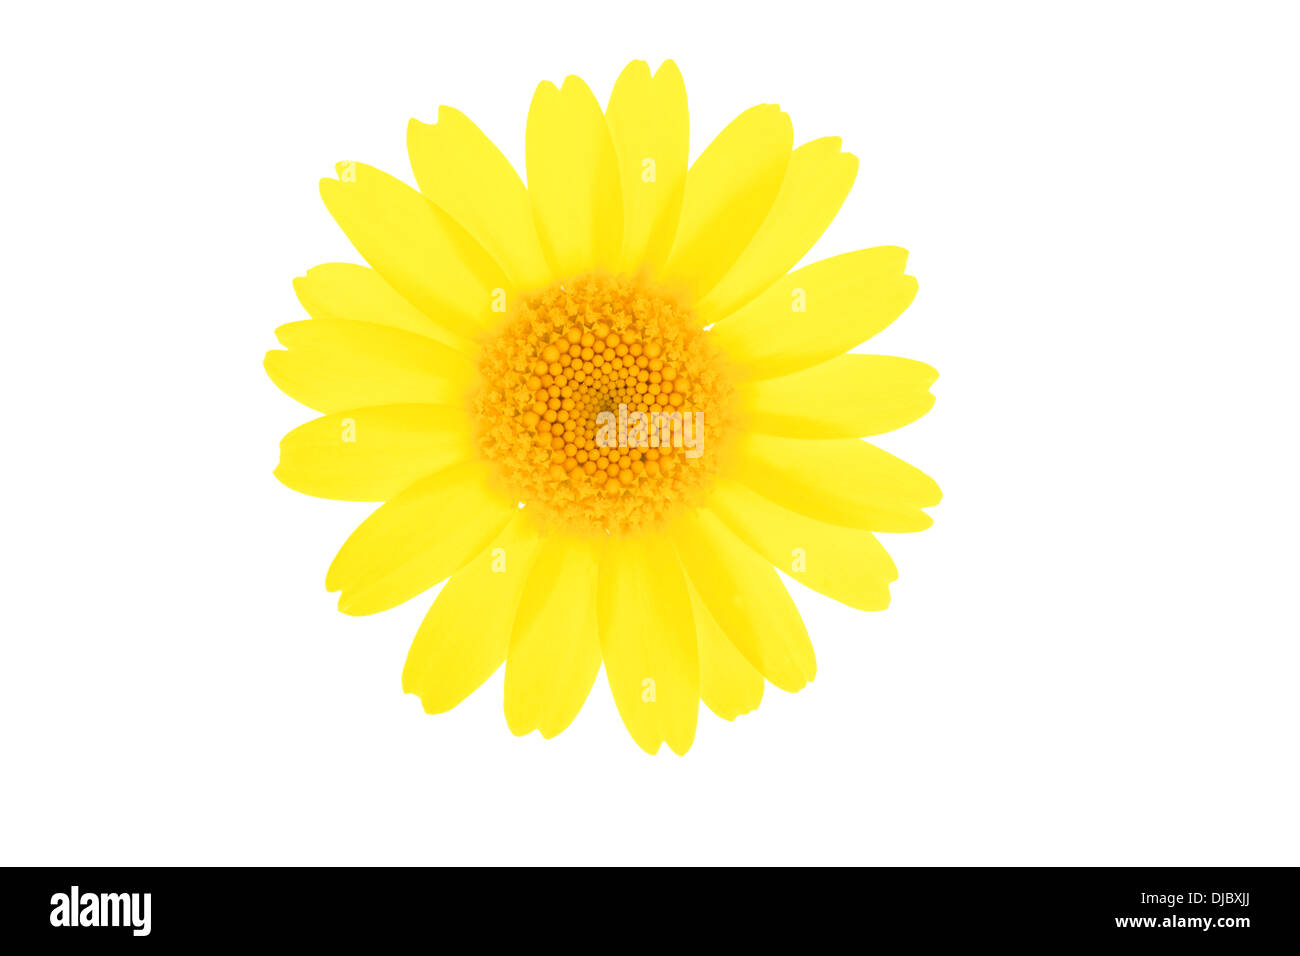 Corn Chamomile Flower isolated on white background with shallow depth of field. Stock Photo